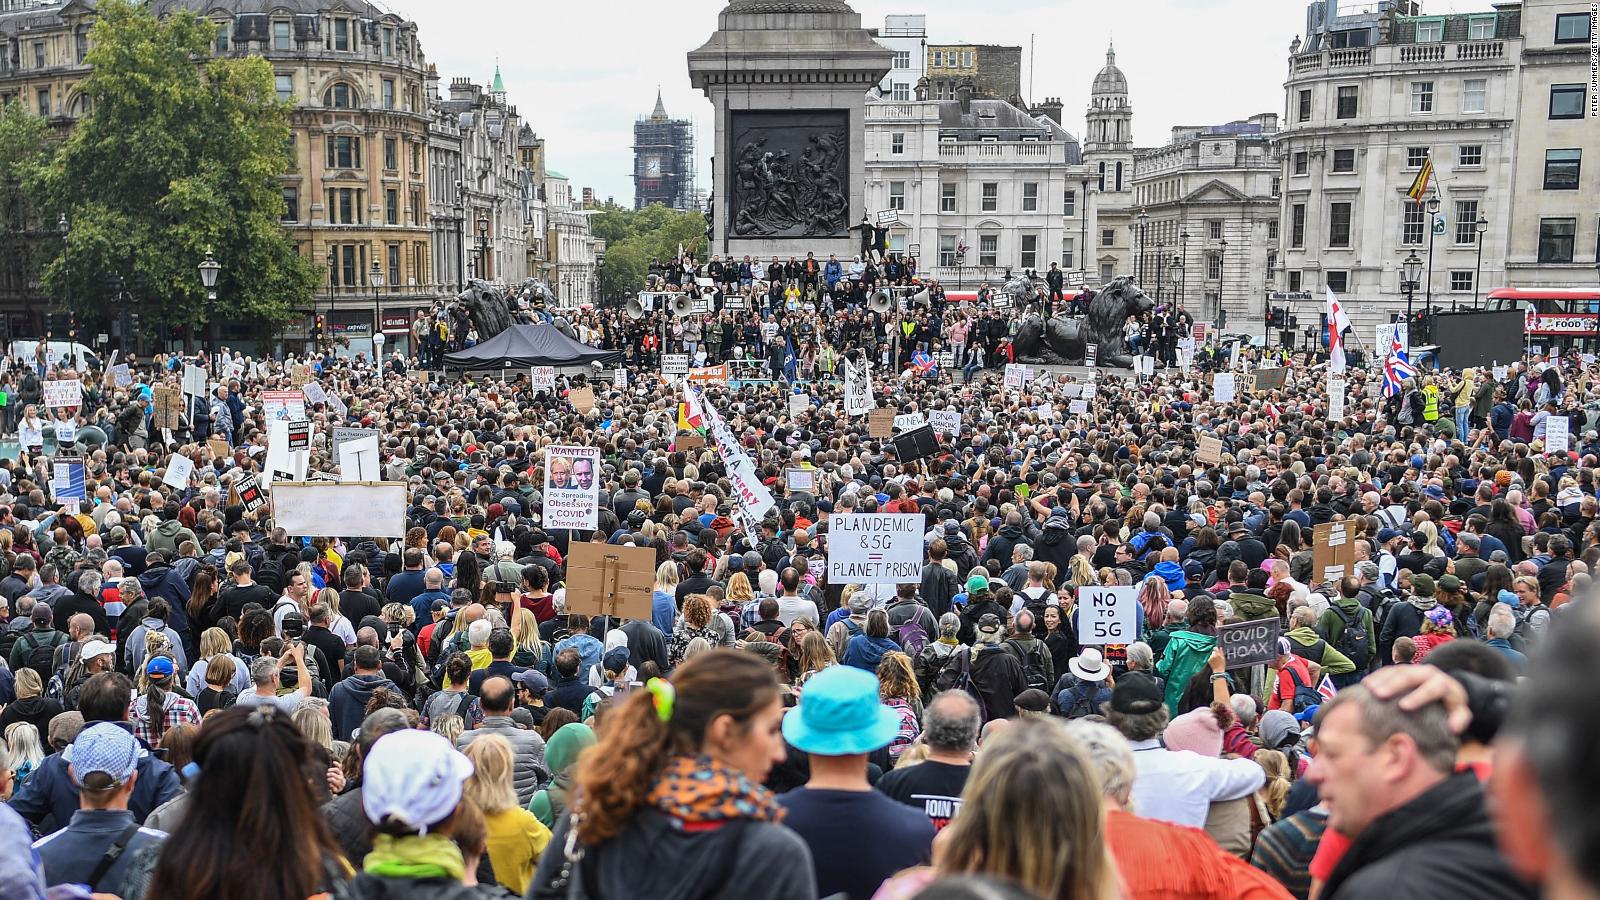 london lockdown protest today